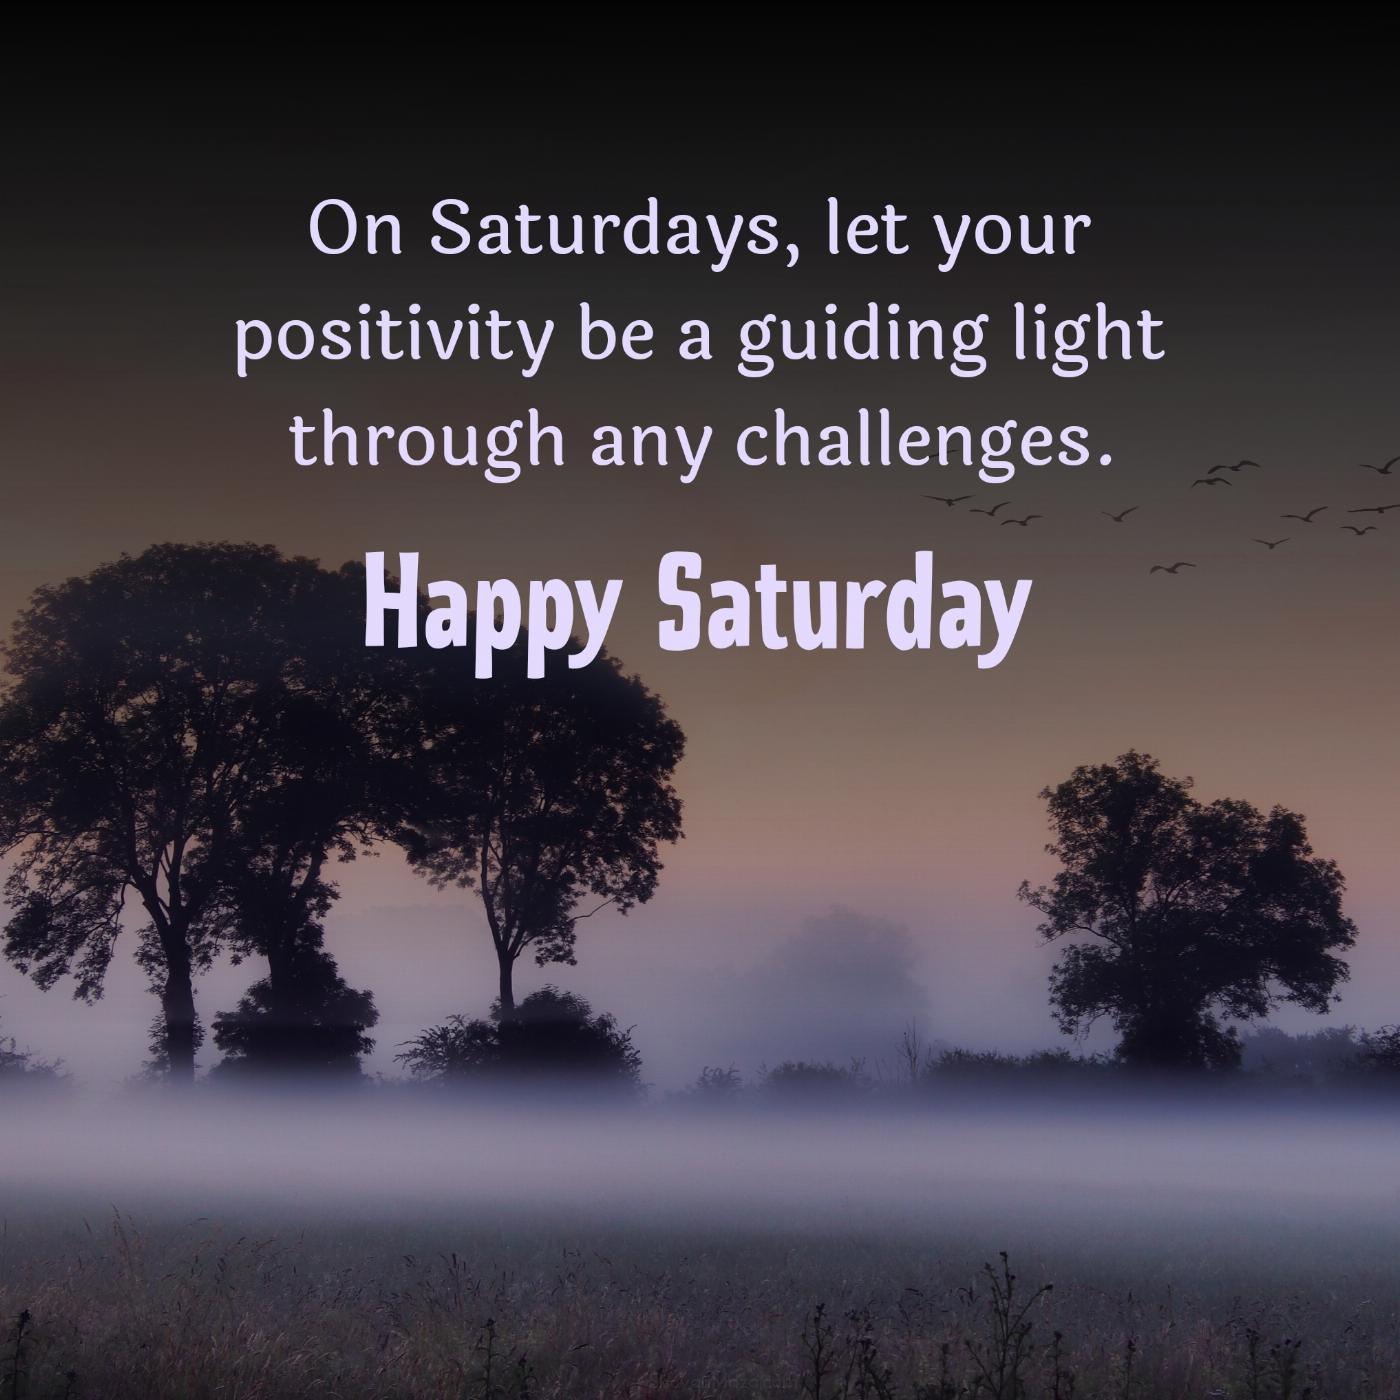 On Saturdays let your positivity be a guiding light